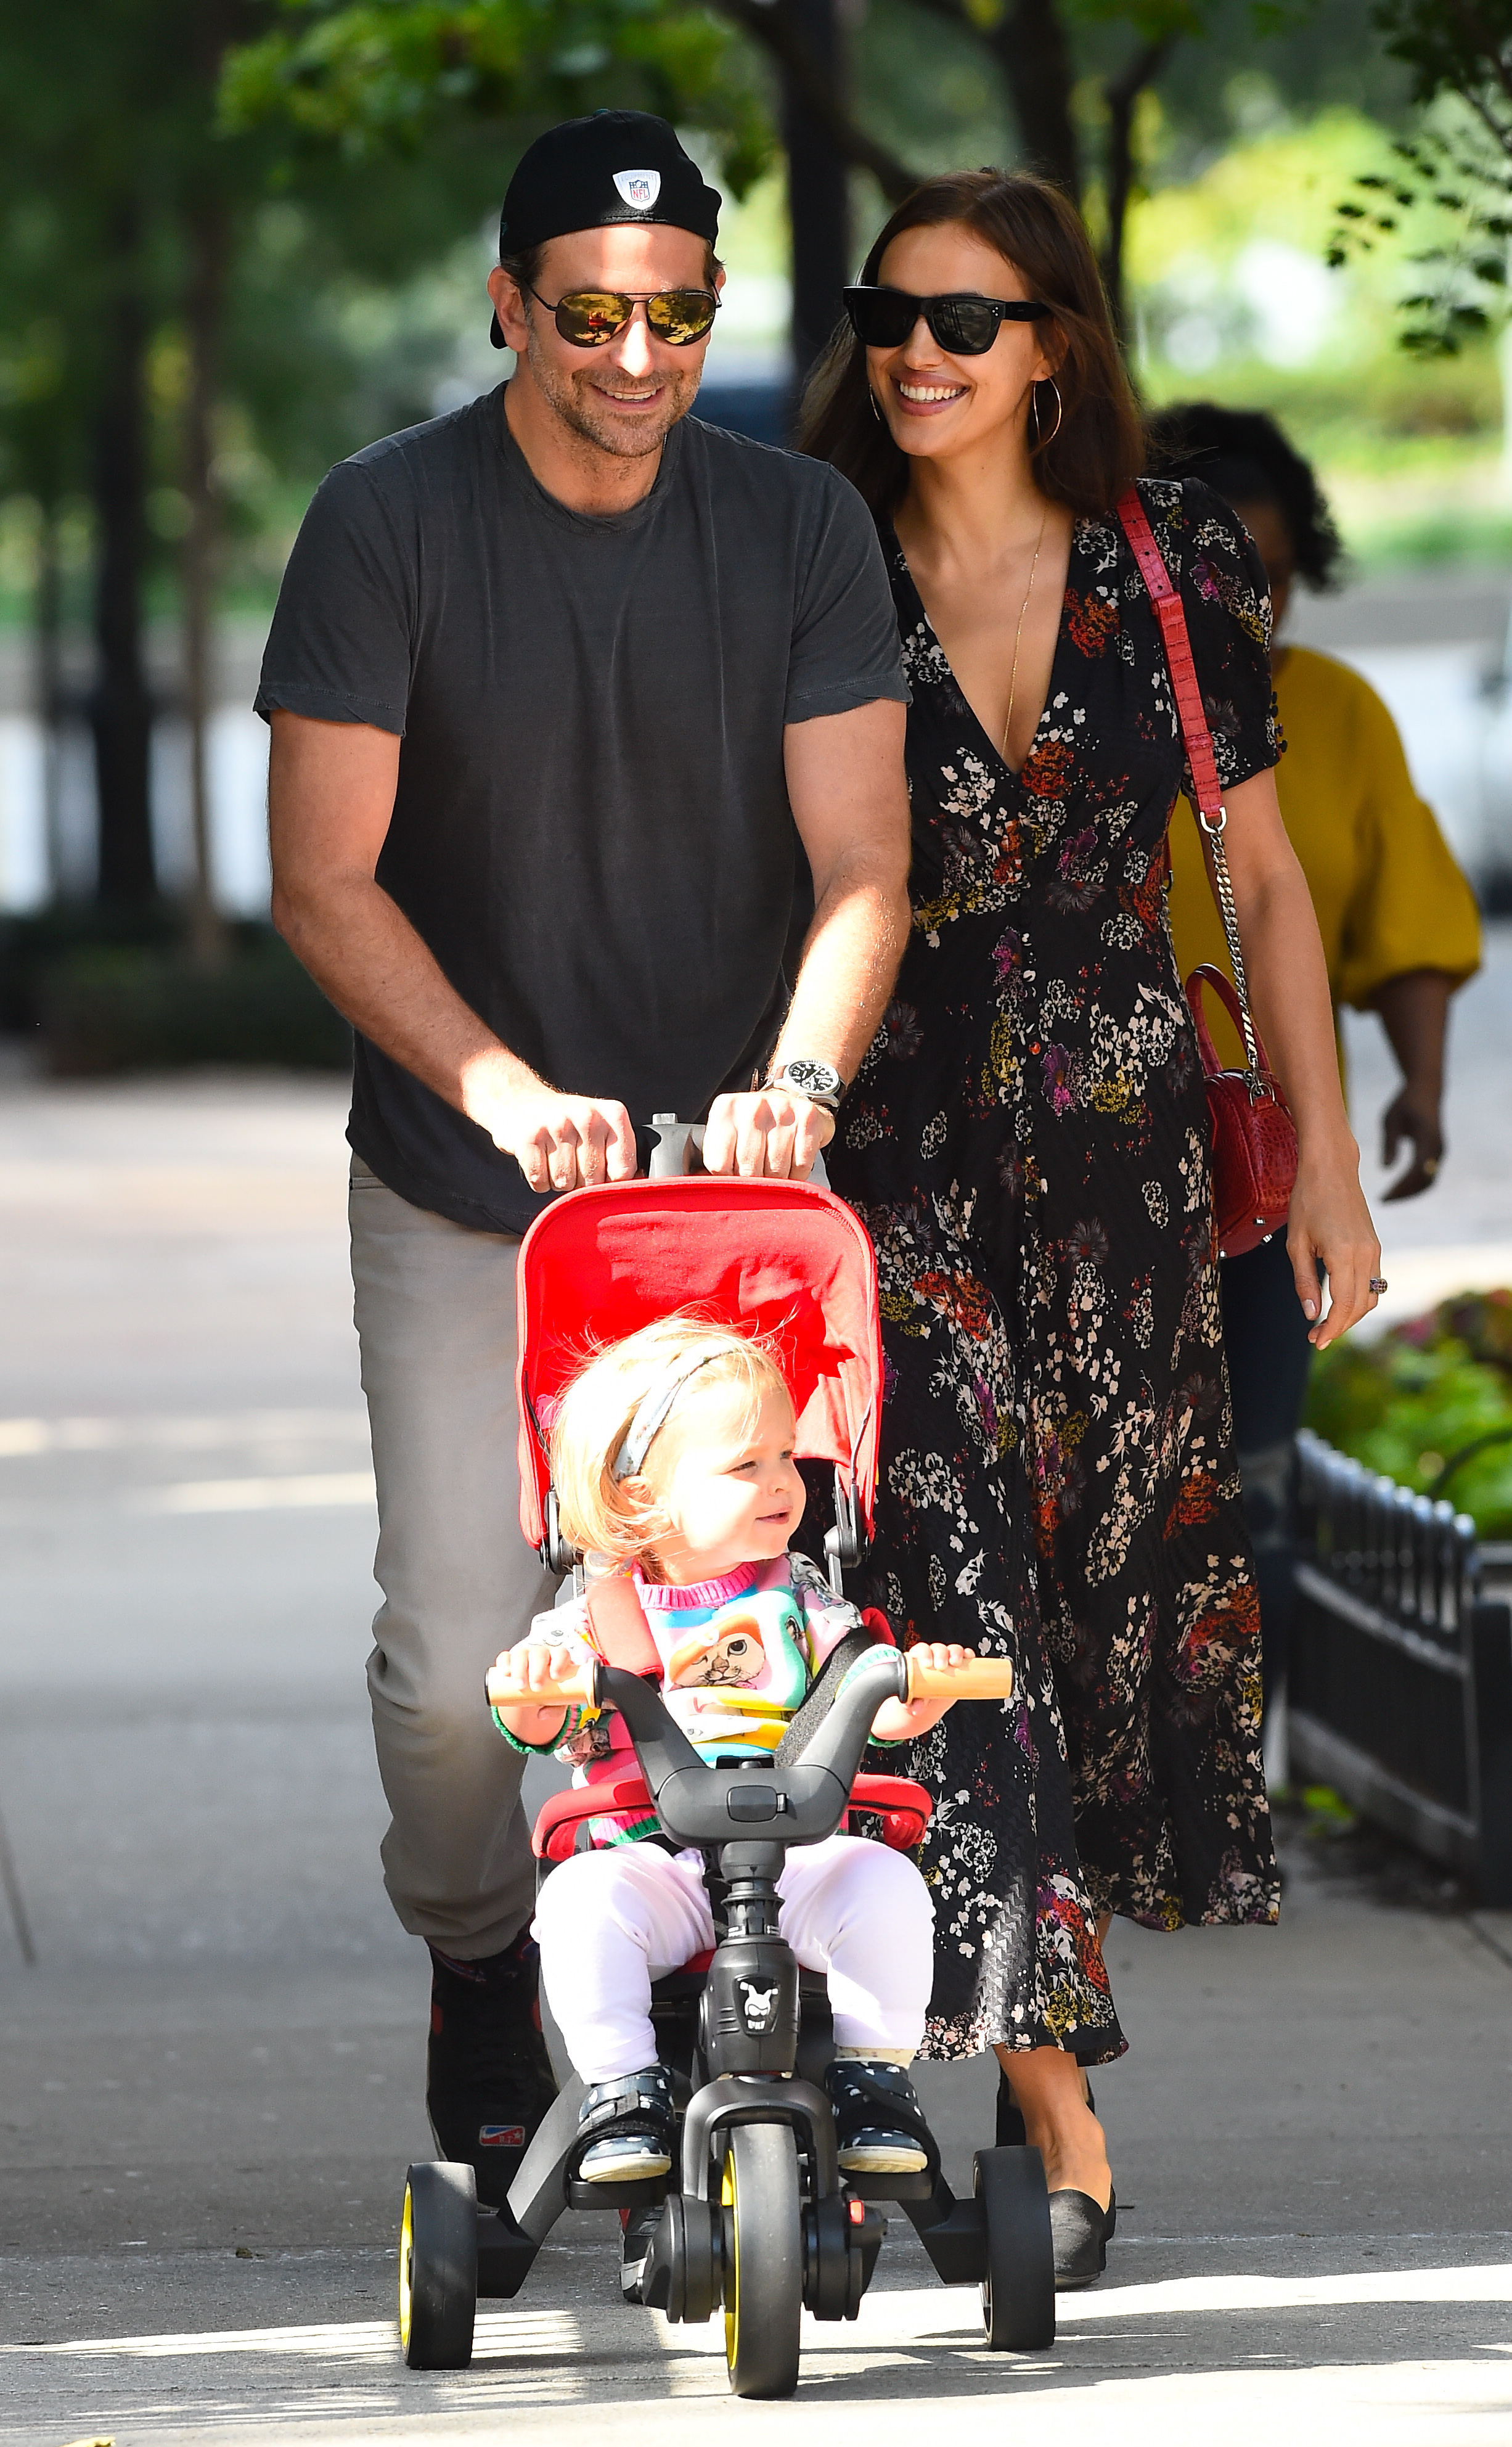 Bradley Cooper and Irina Shayk in Soho on October 4, 2018 in New York City. | Source: Getty Images